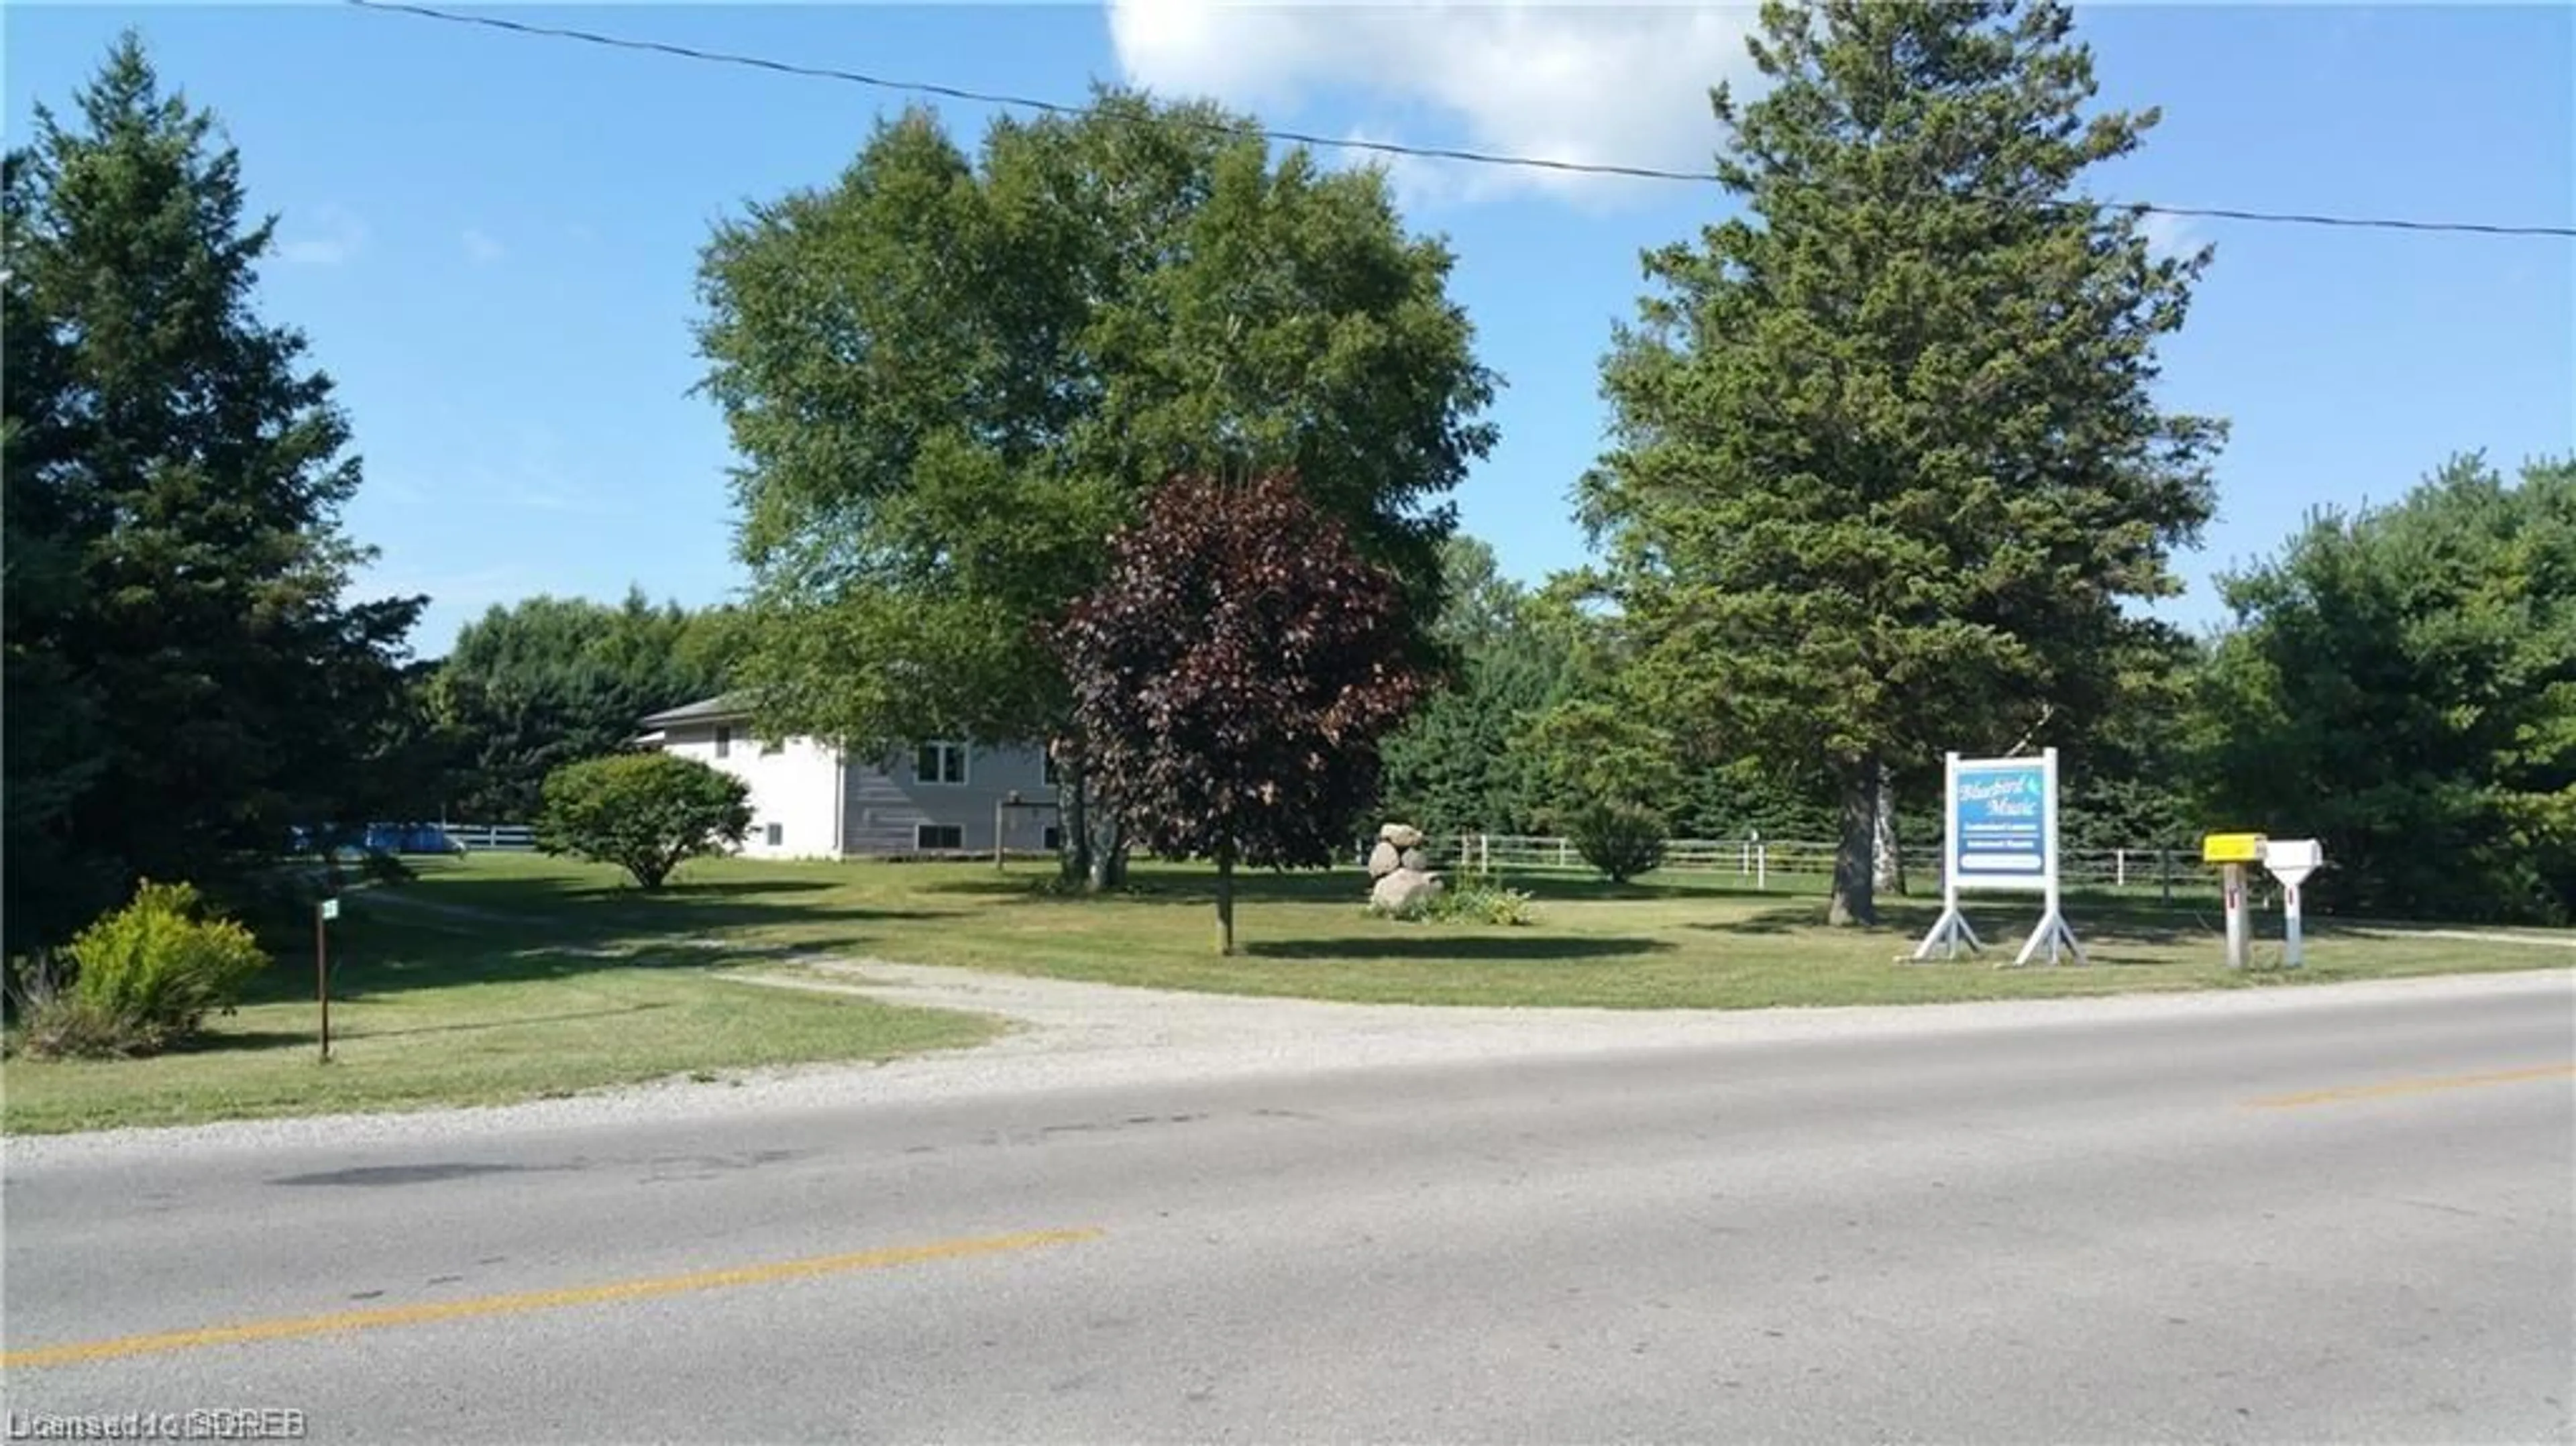 Street view for 359 Hwy 24, St. Williams Ontario N0E 1P0